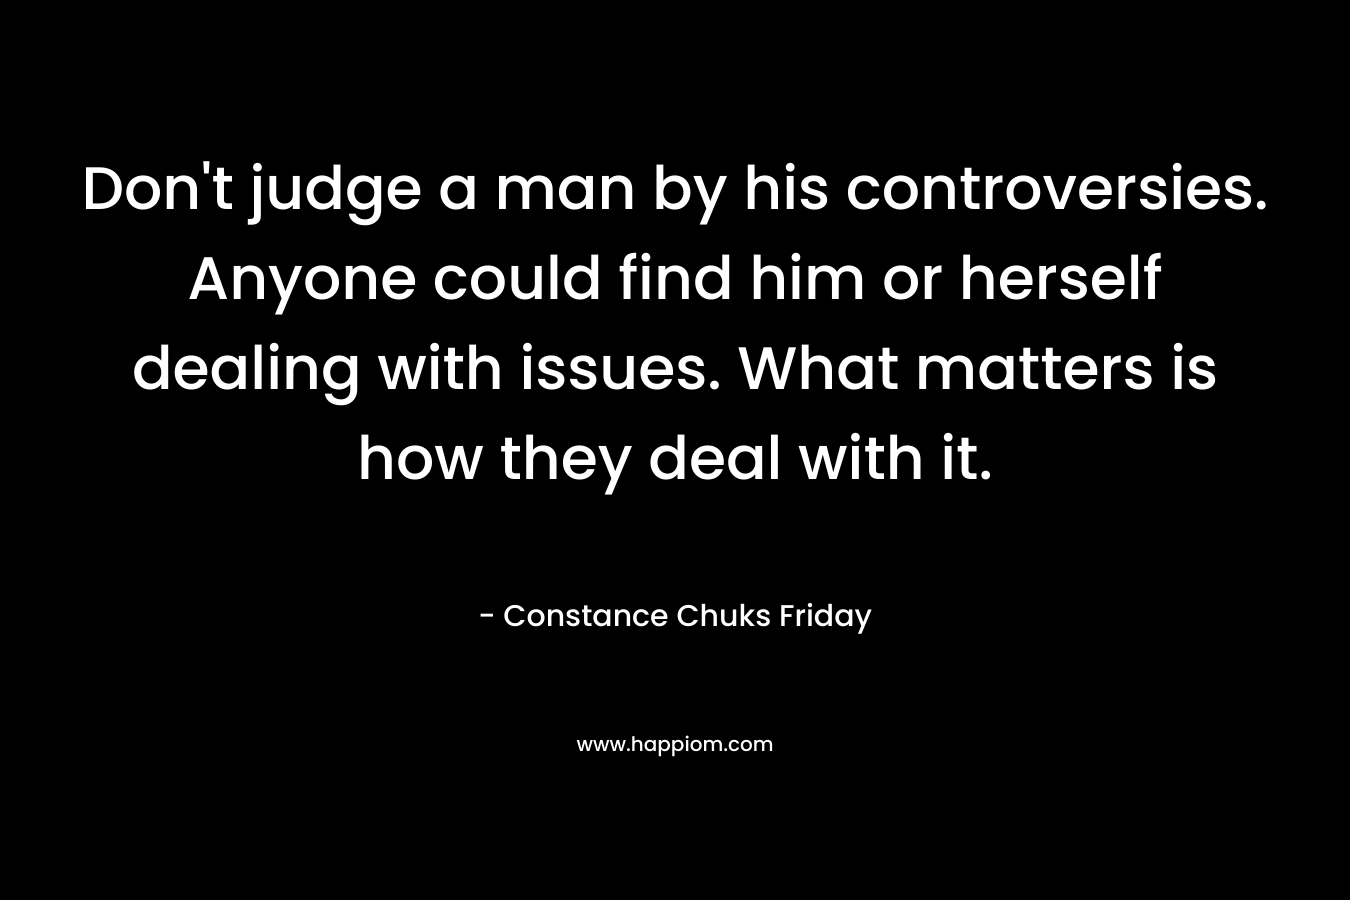 Don't judge a man by his controversies. Anyone could find him or herself dealing with issues. What matters is how they deal with it.